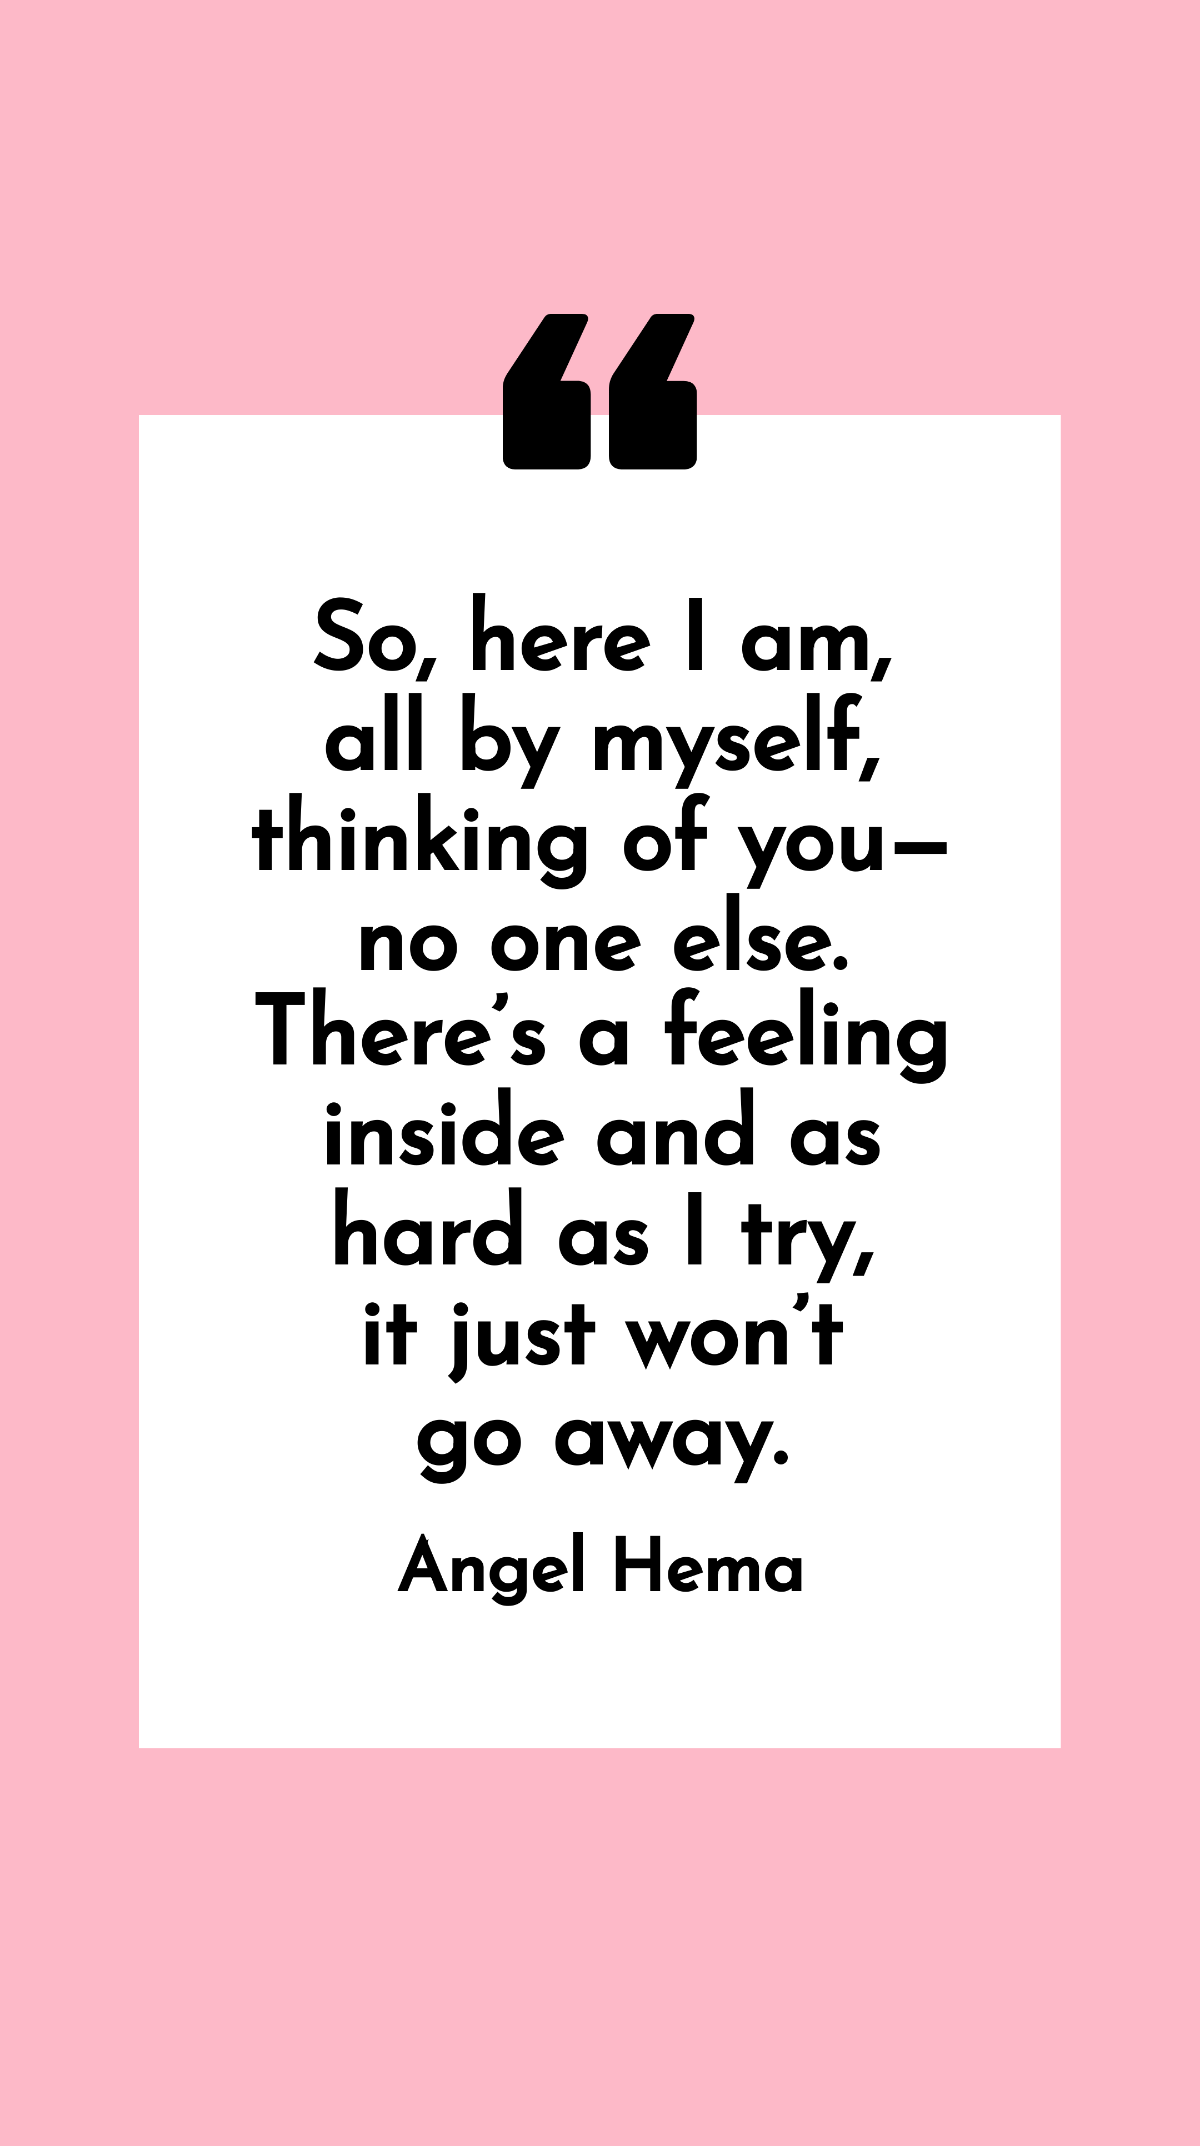 Angel Hema - So, here I am, all by myself, thinking of you – no one else. There’s a feeling inside and as hard as I try, it just won’t go away. Template